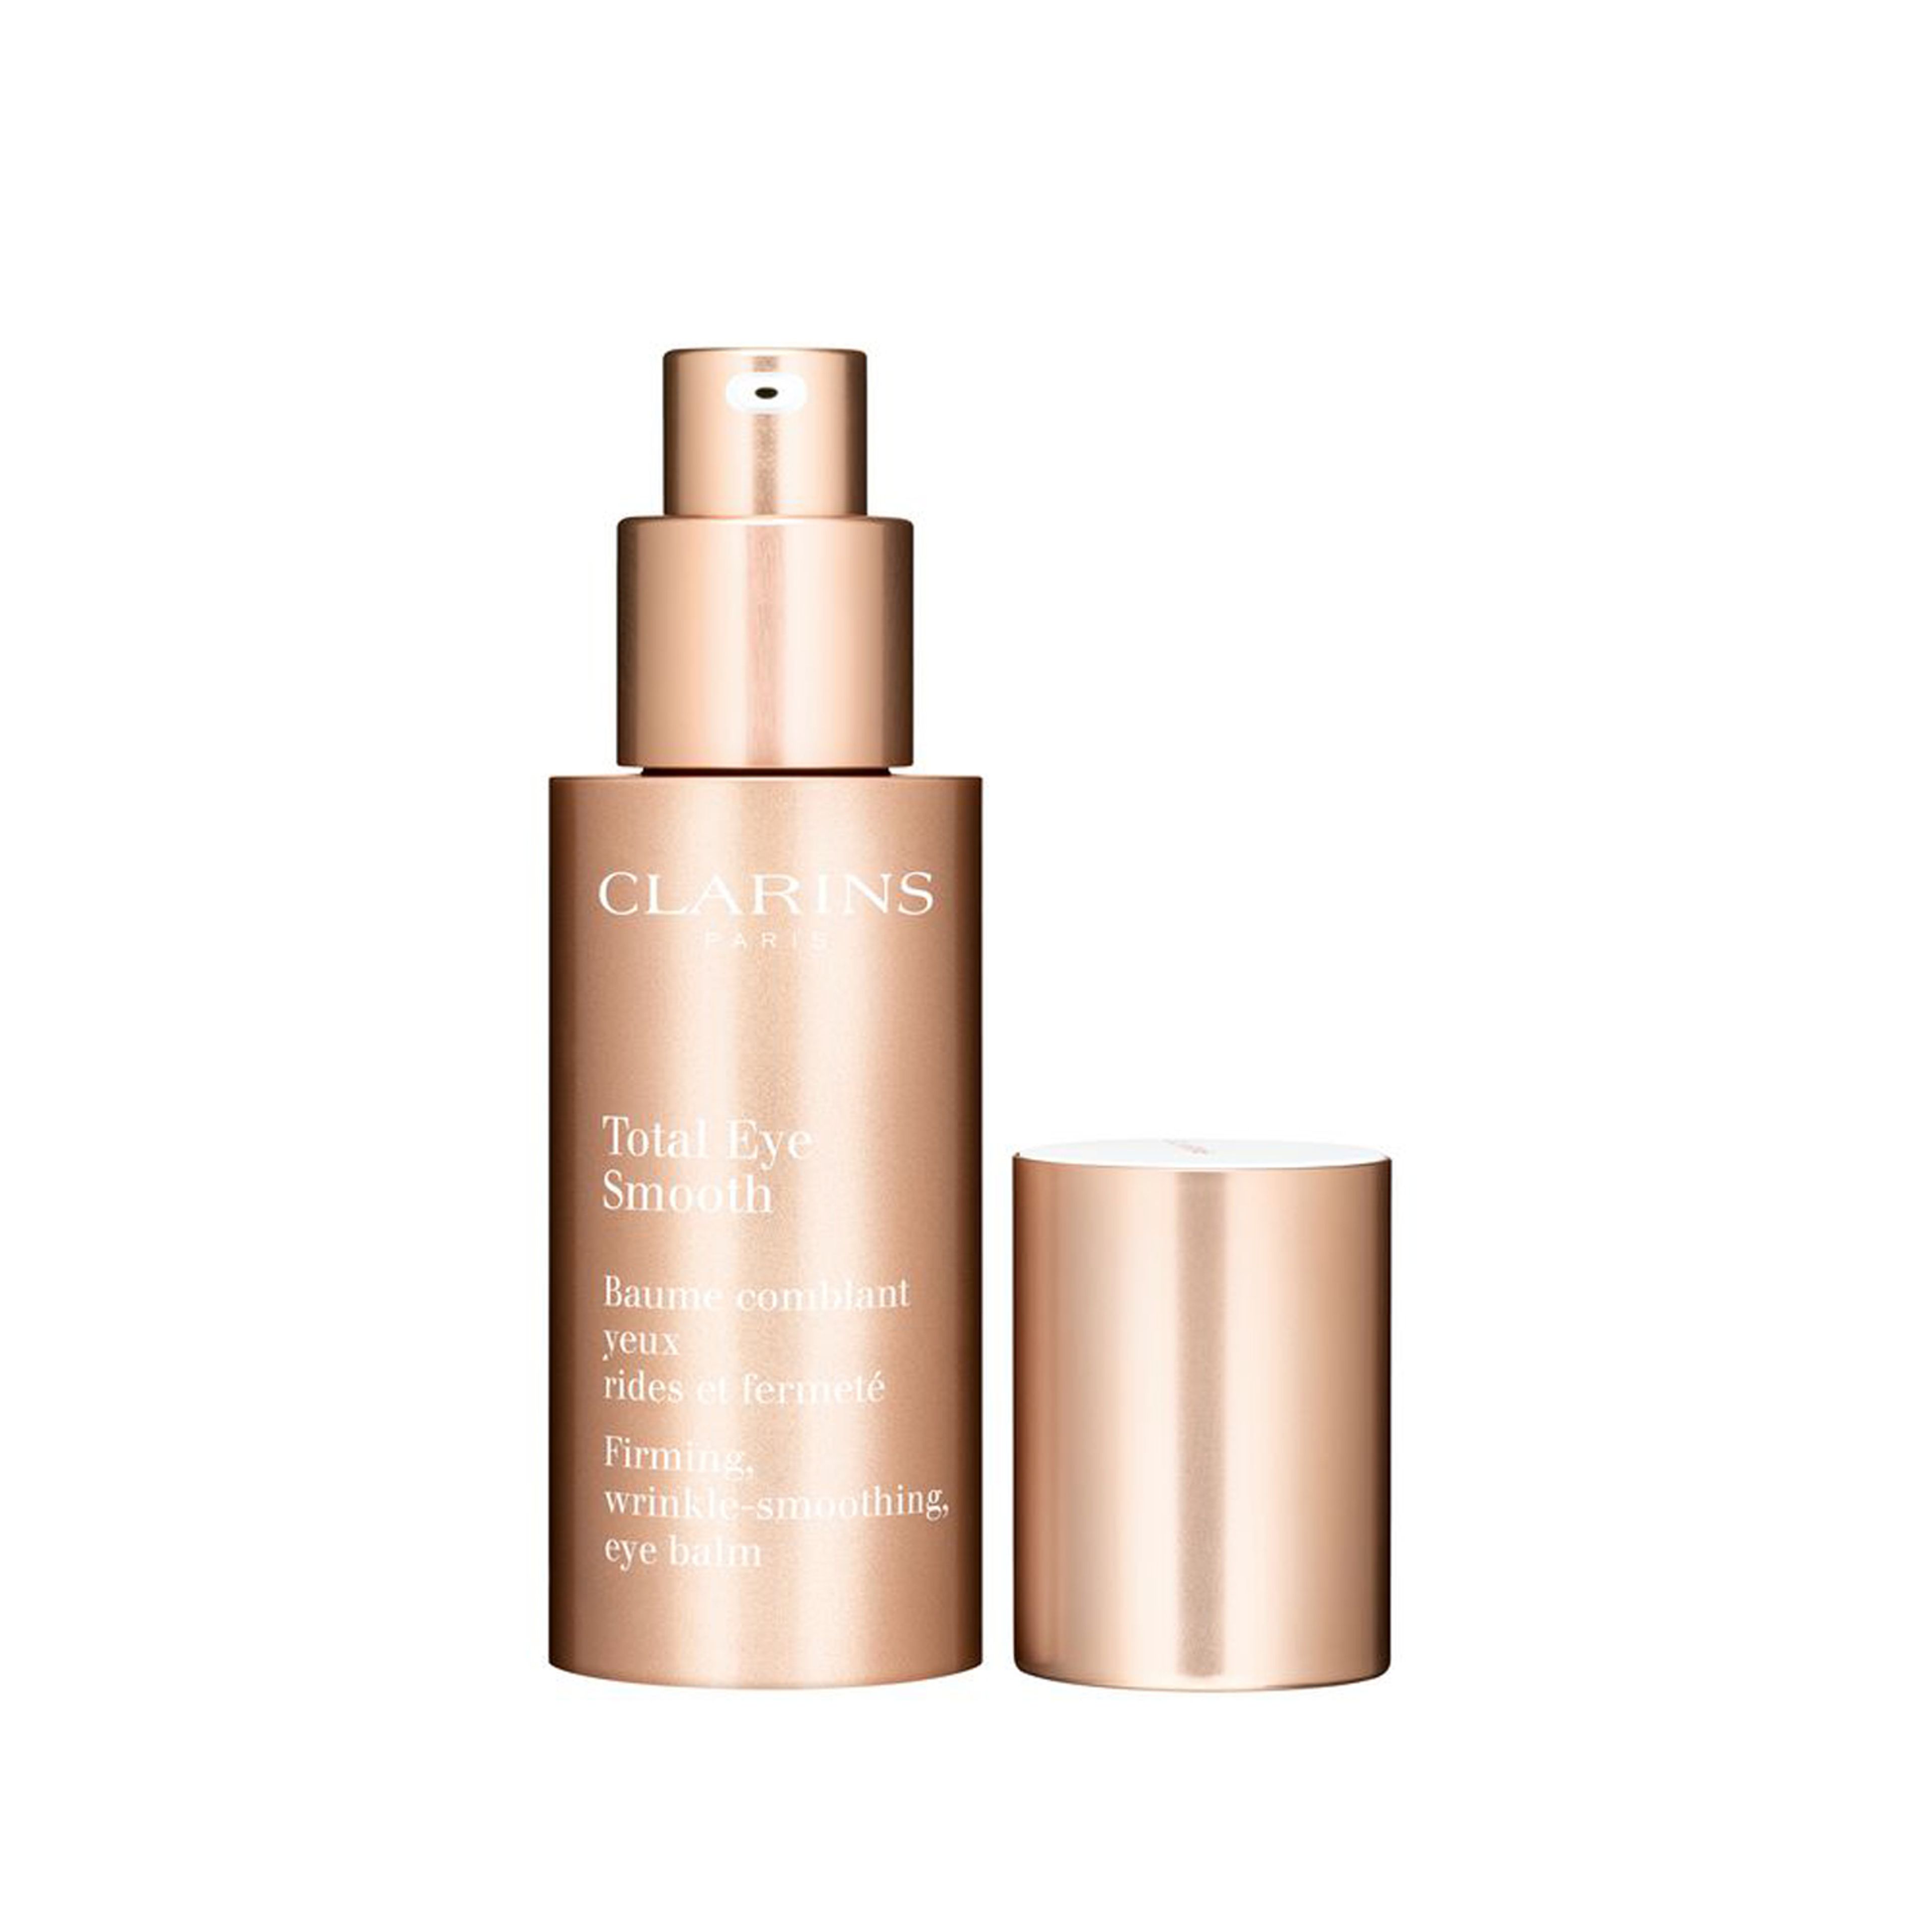 Clarins Total Eye Smooth 3